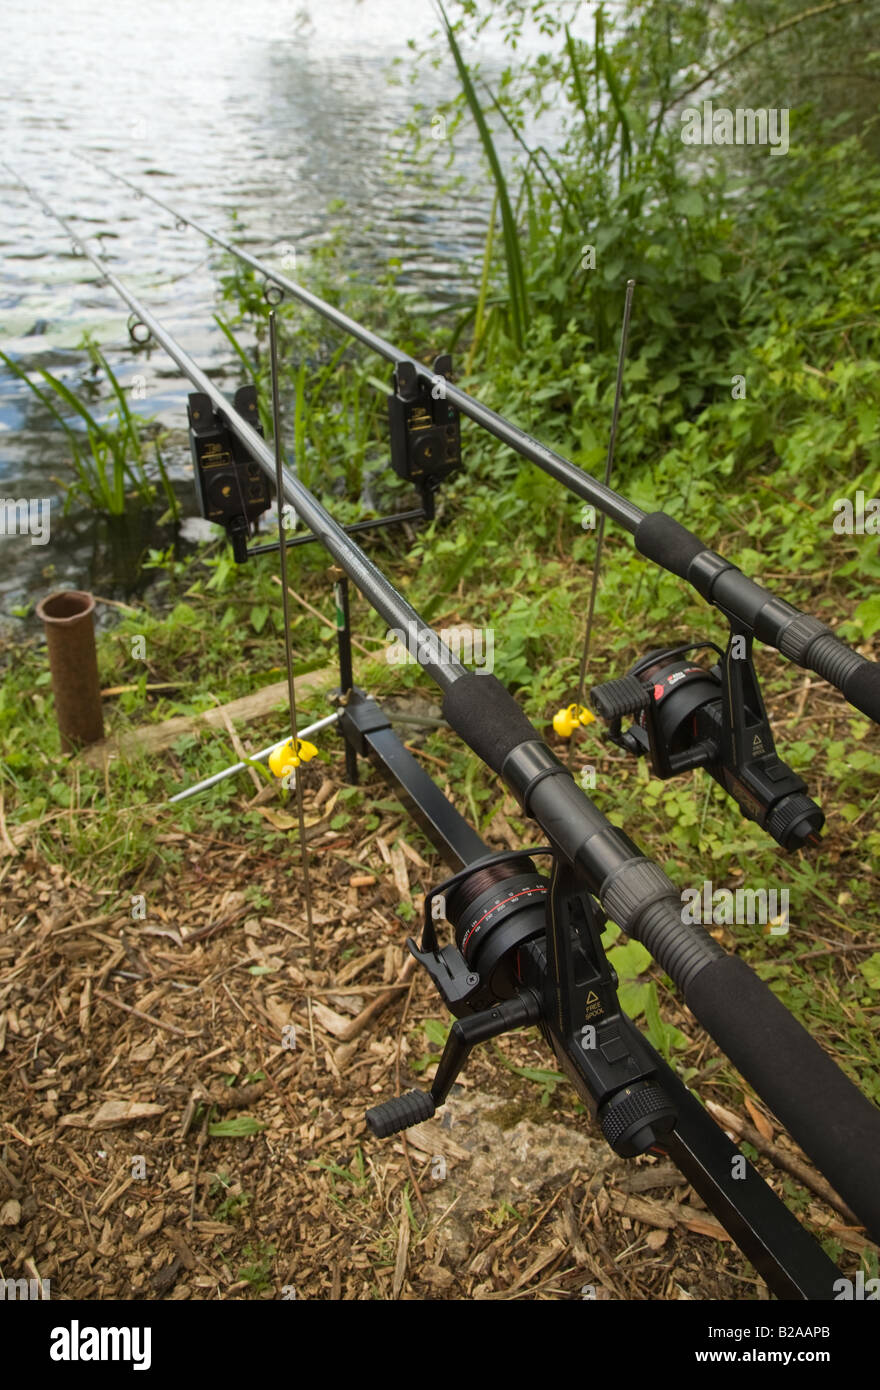 Fishing rods and reels set up with electronic bite alarms to catch carp by  the side of Farlow lake Iver Bucks UK Stock Photo - Alamy